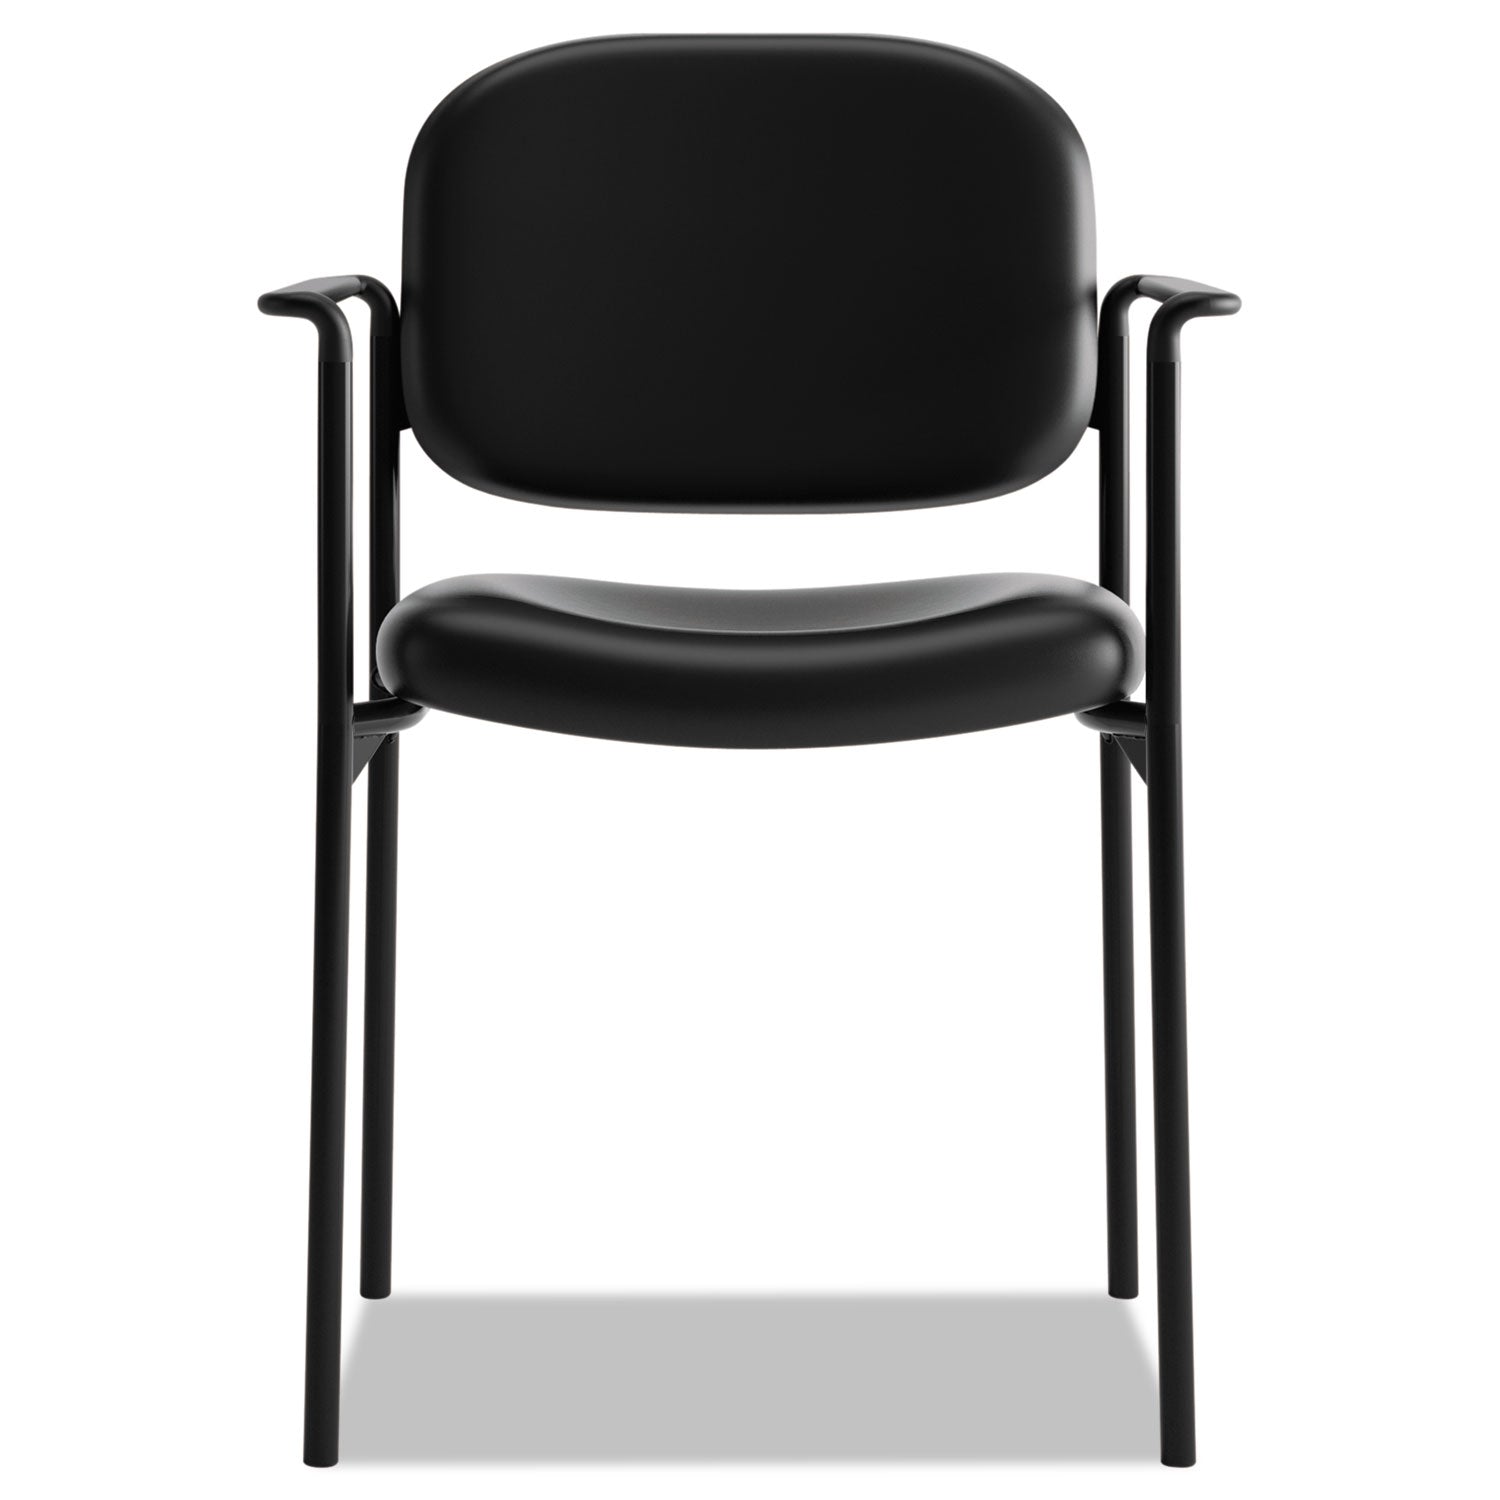 VL616 Stacking Guest Chair with Arms, Bonded Leather Upholstery, 23.25" x 21" x 32.75", Black Seat, Black Back, Black Base - 